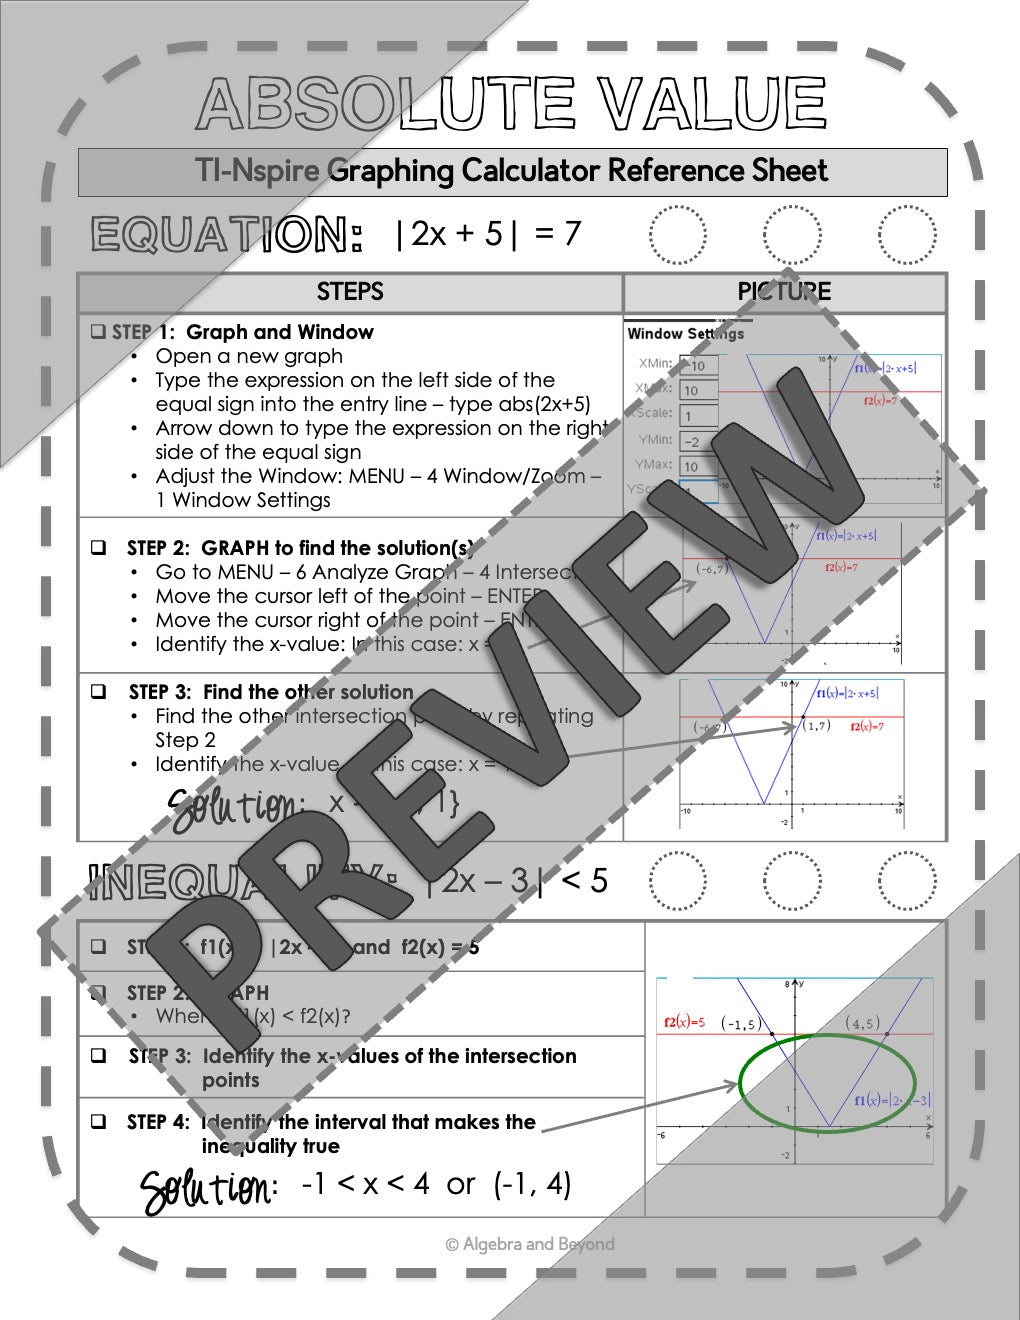 Absolute Value Equations and Inequalities | TI-Nspire Calculator Reference Sheet